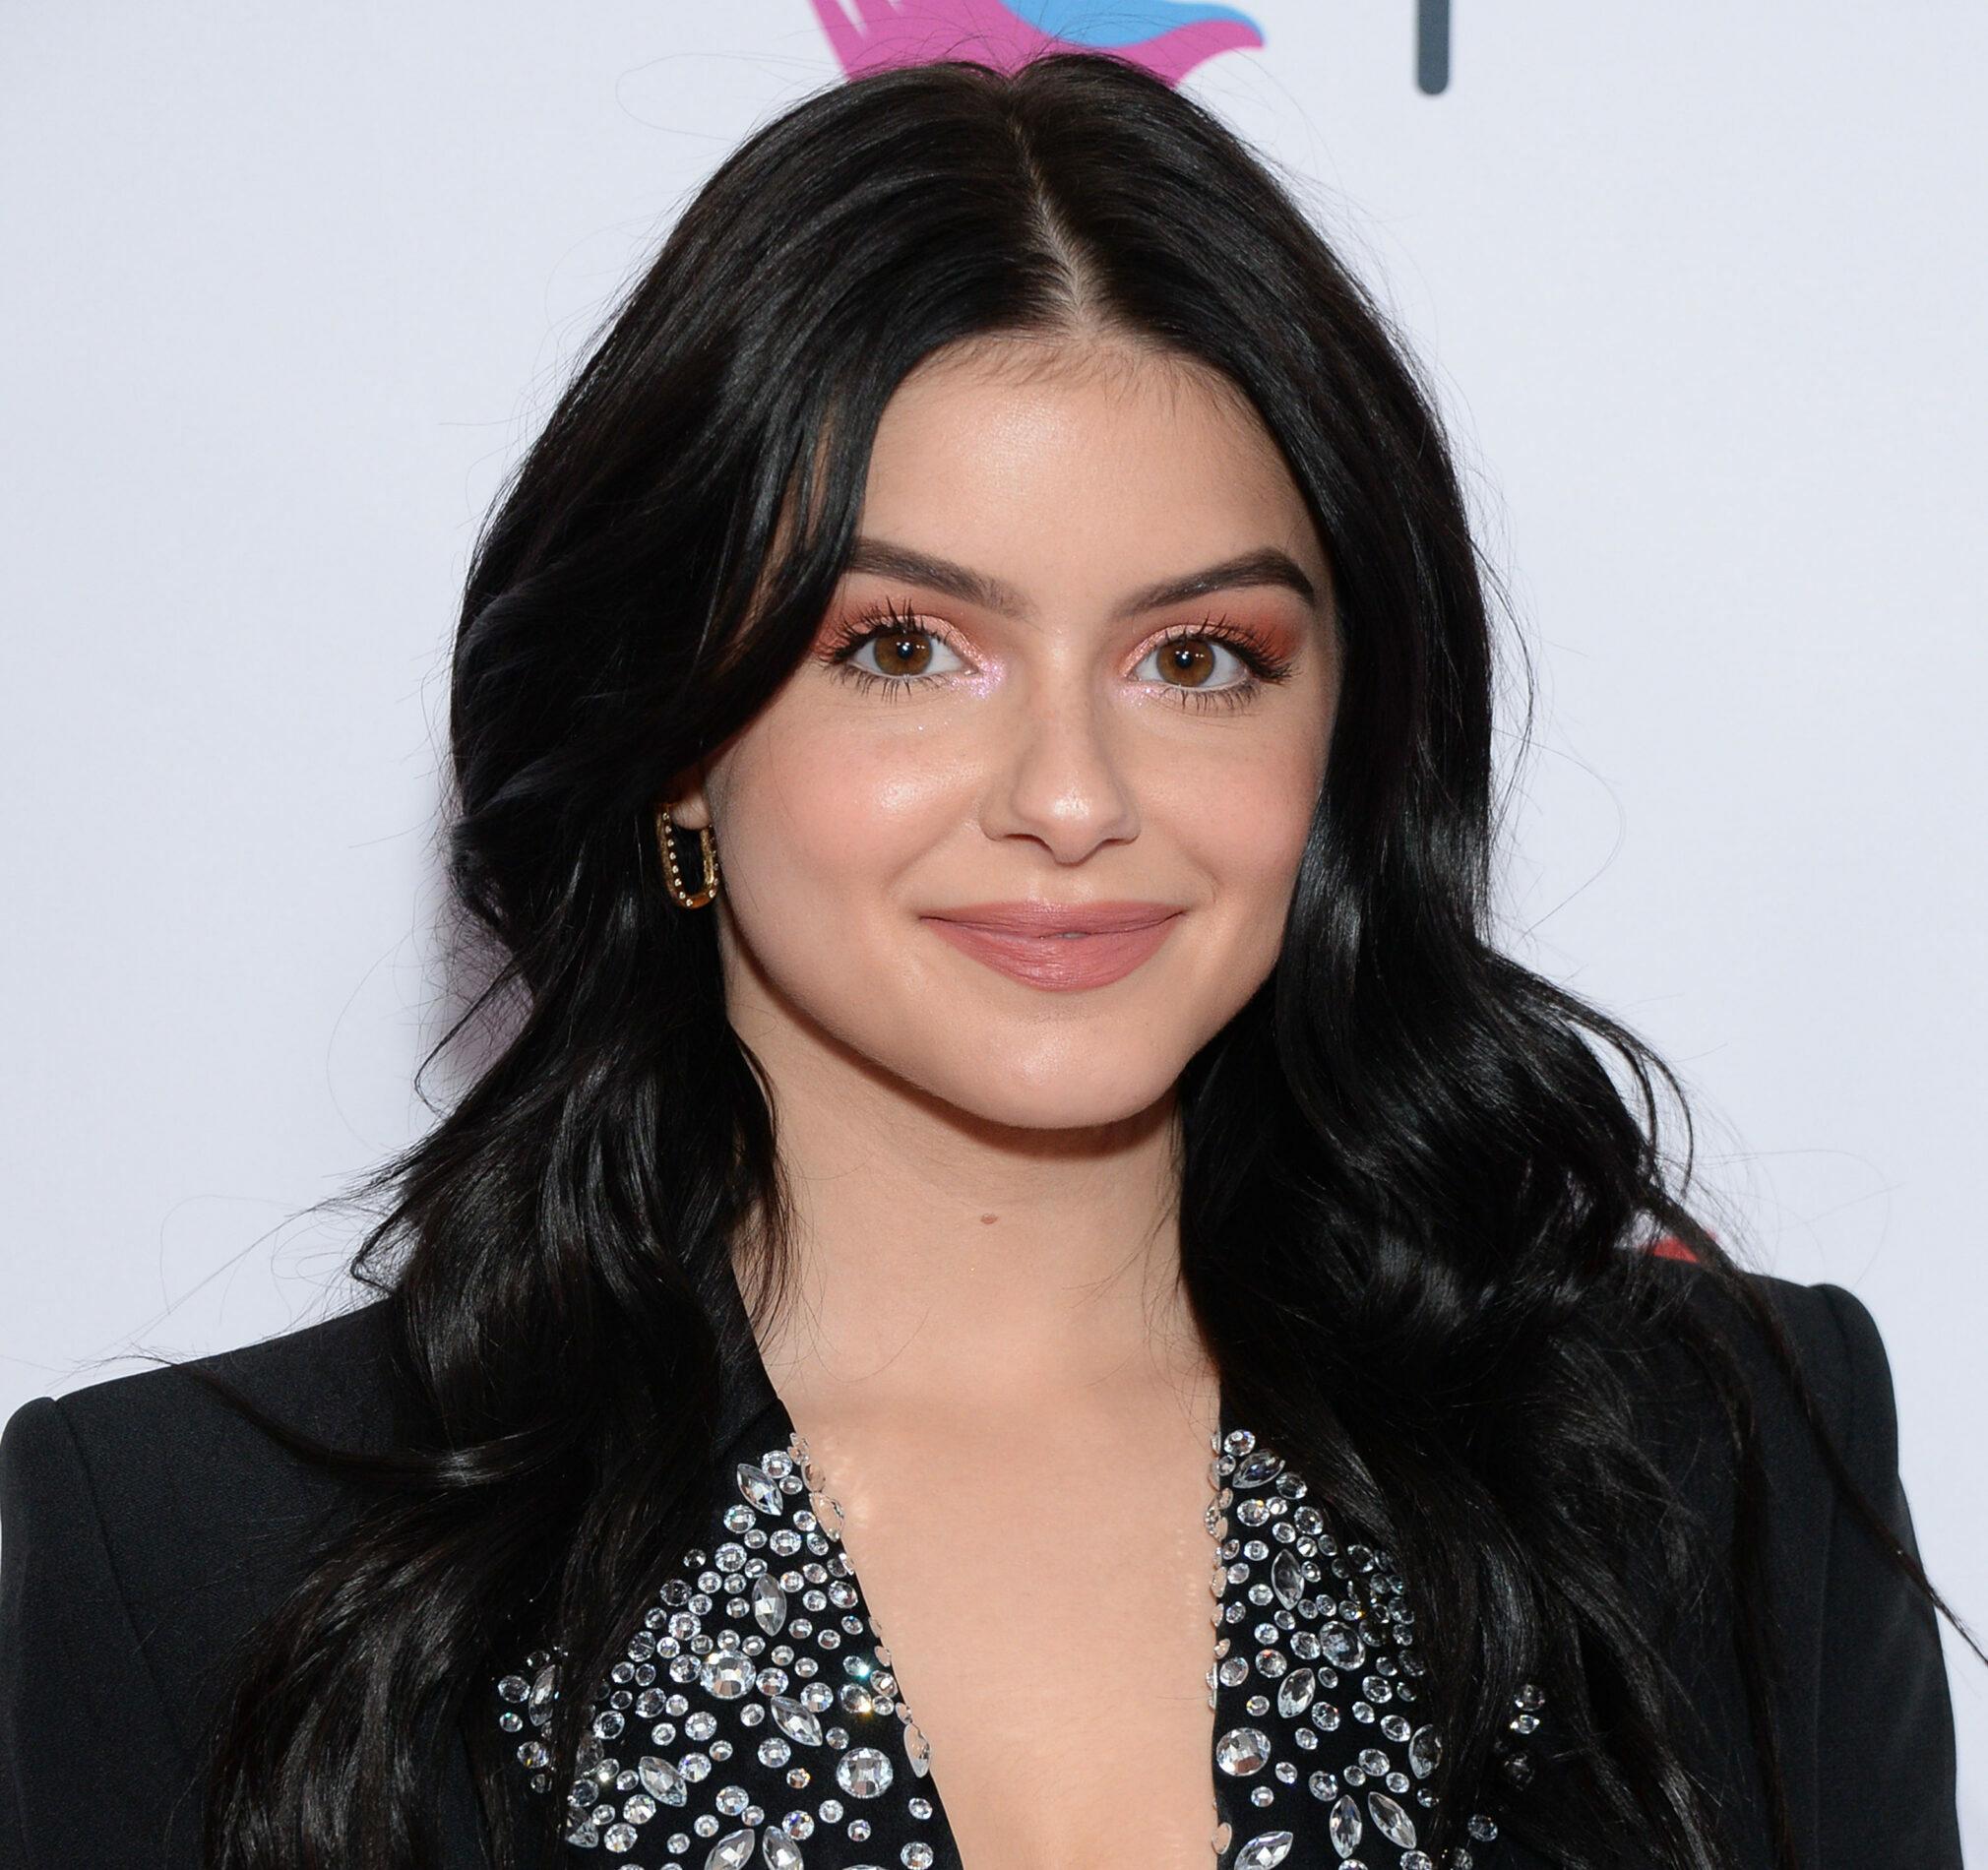 2nd Annual Girl Up #GirlHero Awards. 13 Oct 2019 Pictured: Ariel Winter.